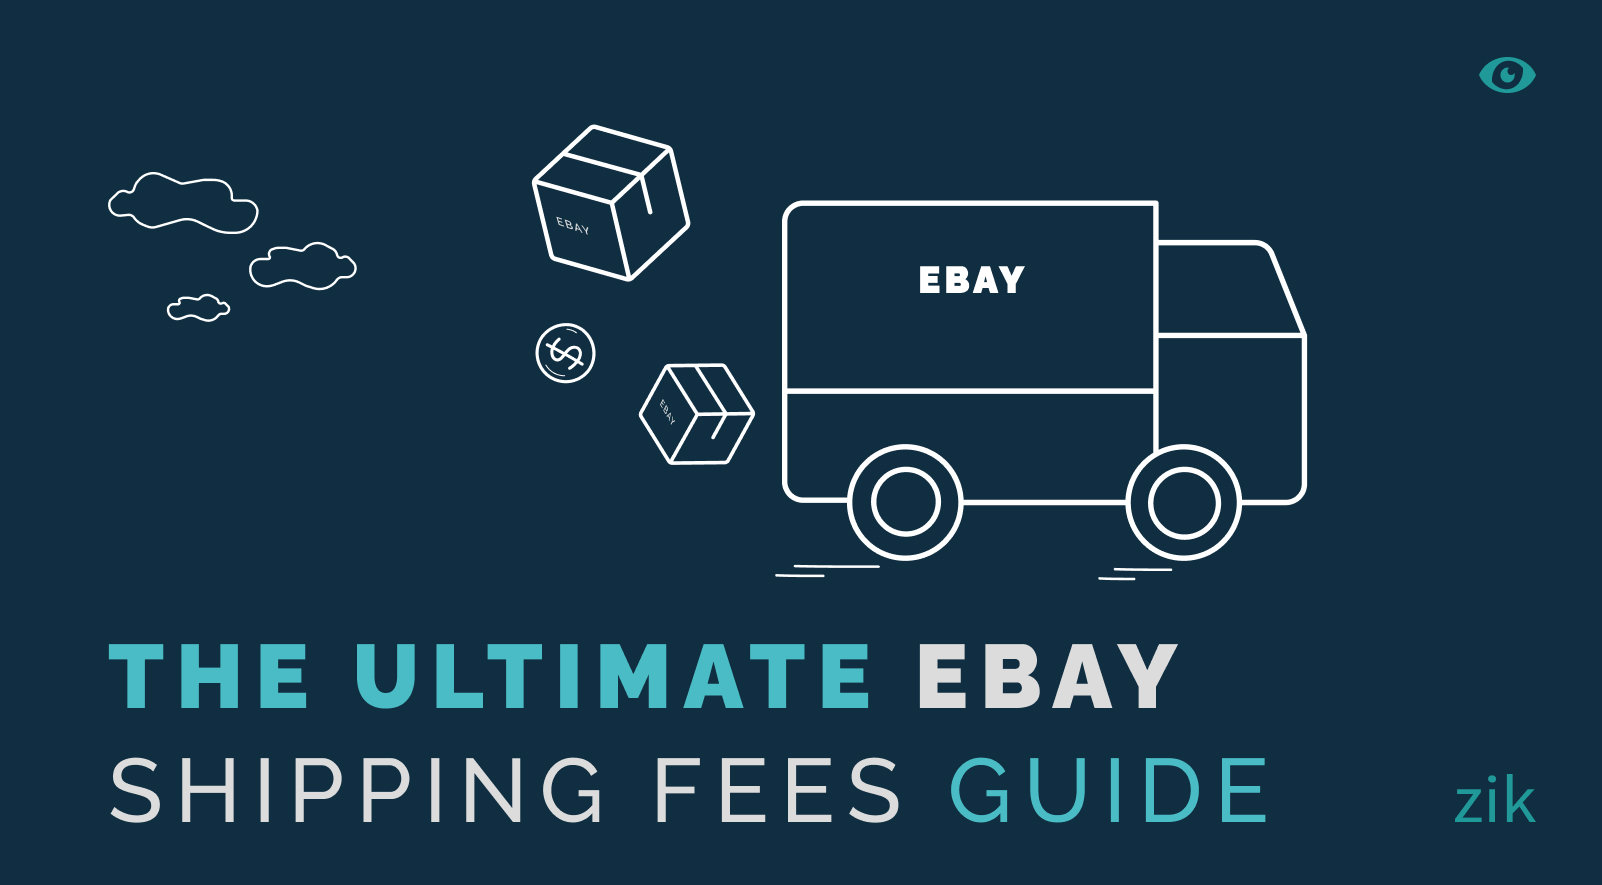 eBay shipping fees guide